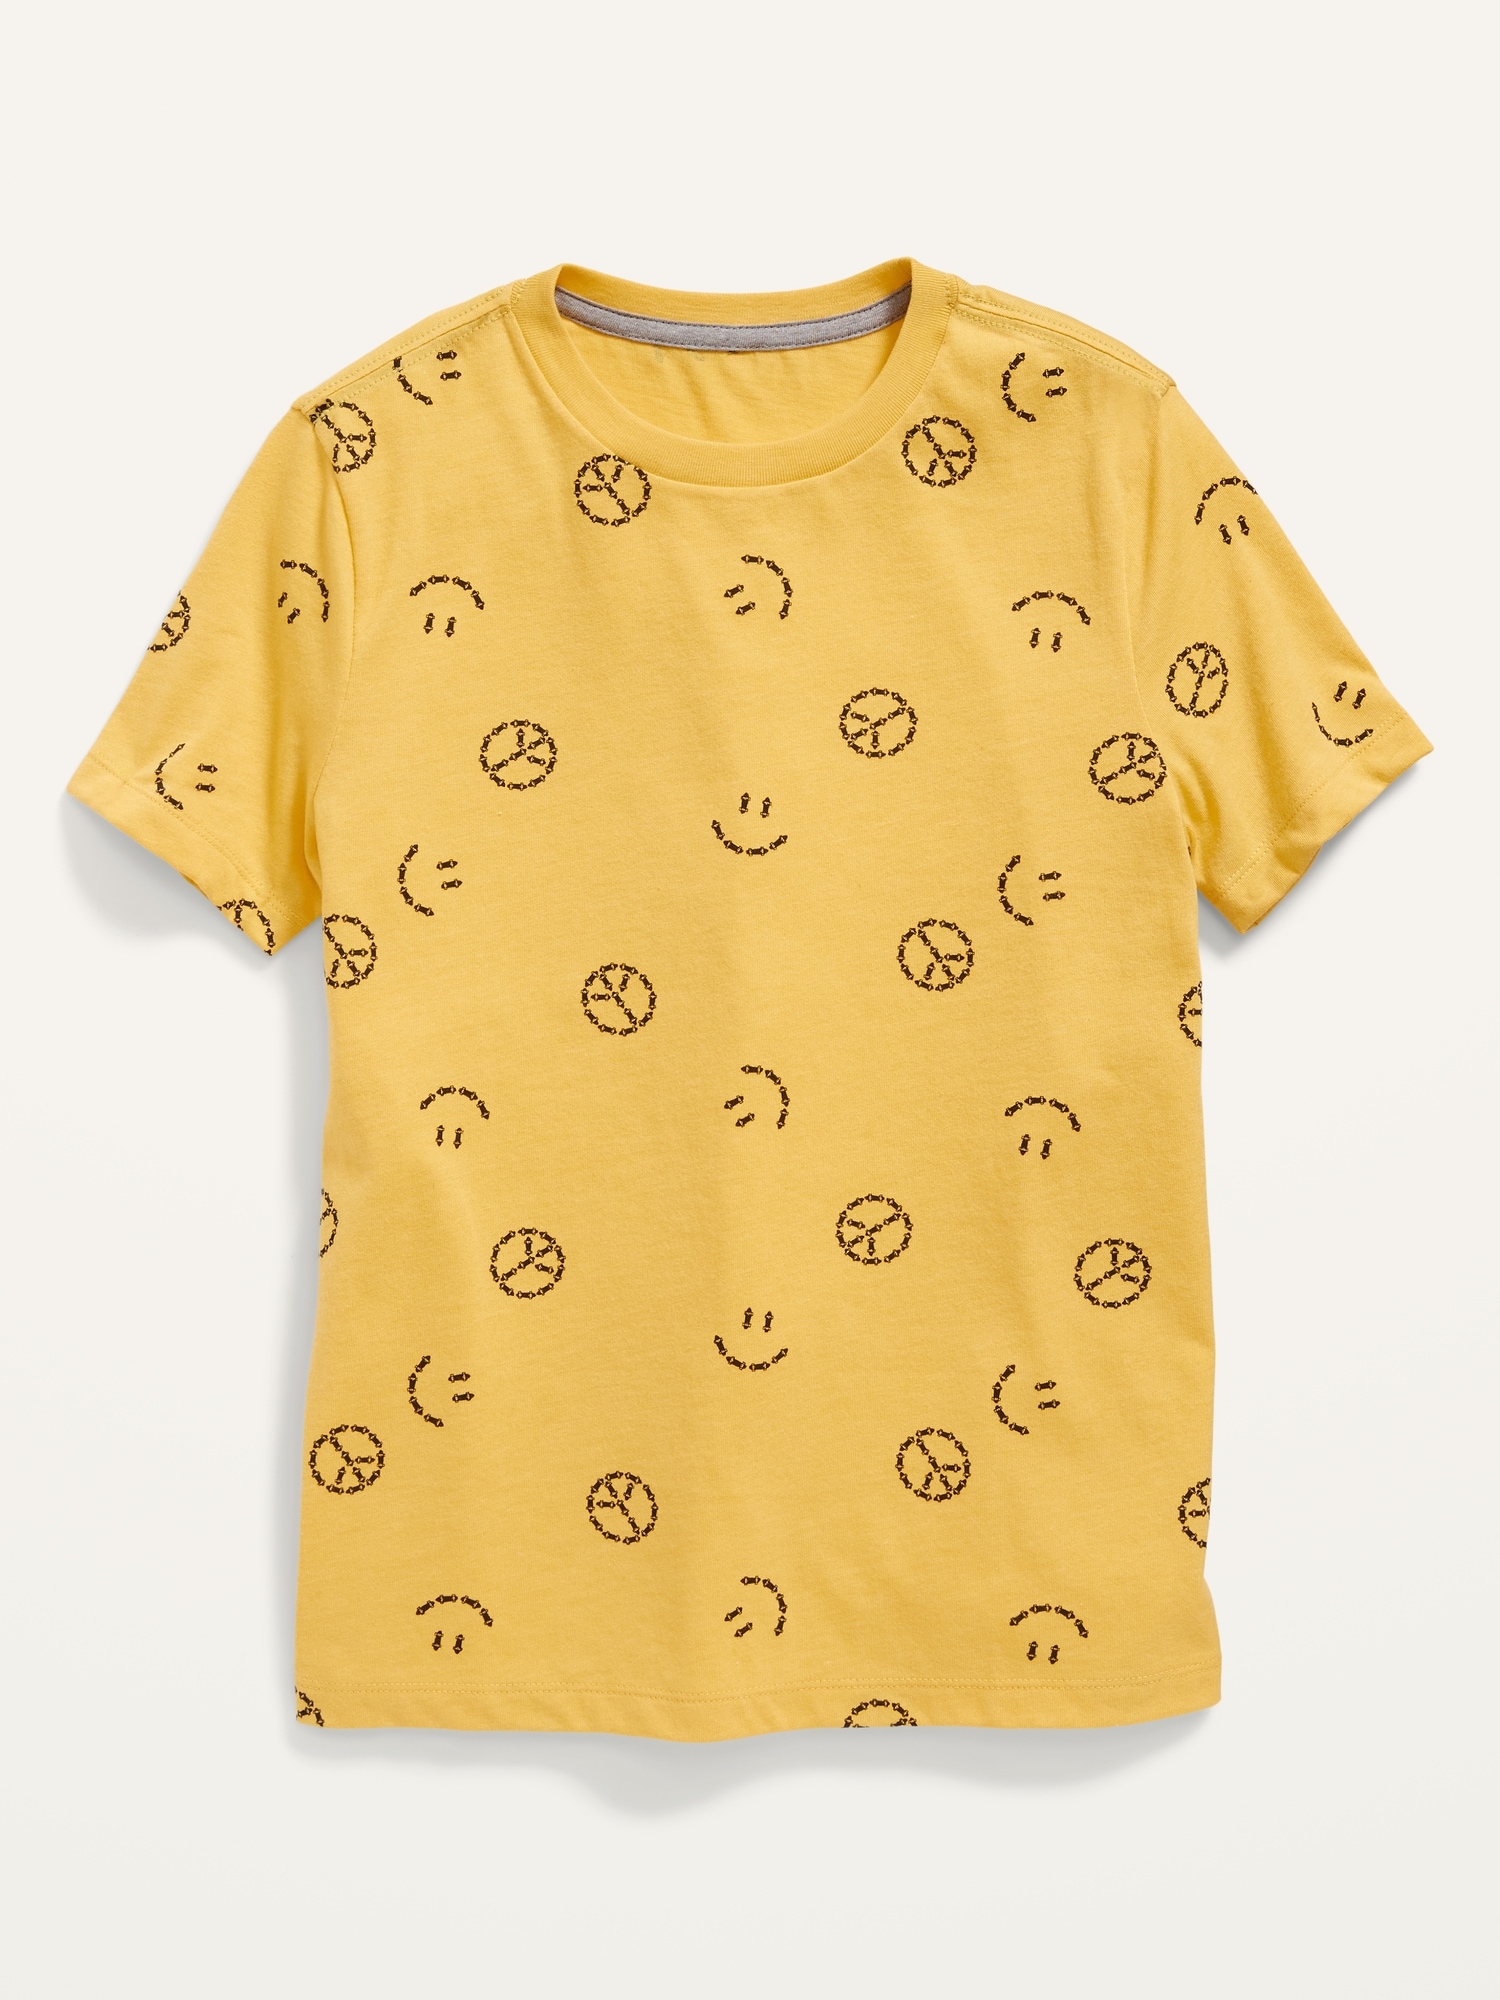 Softest Short-Sleeve Printed T-Shirt for Boys | Old Navy